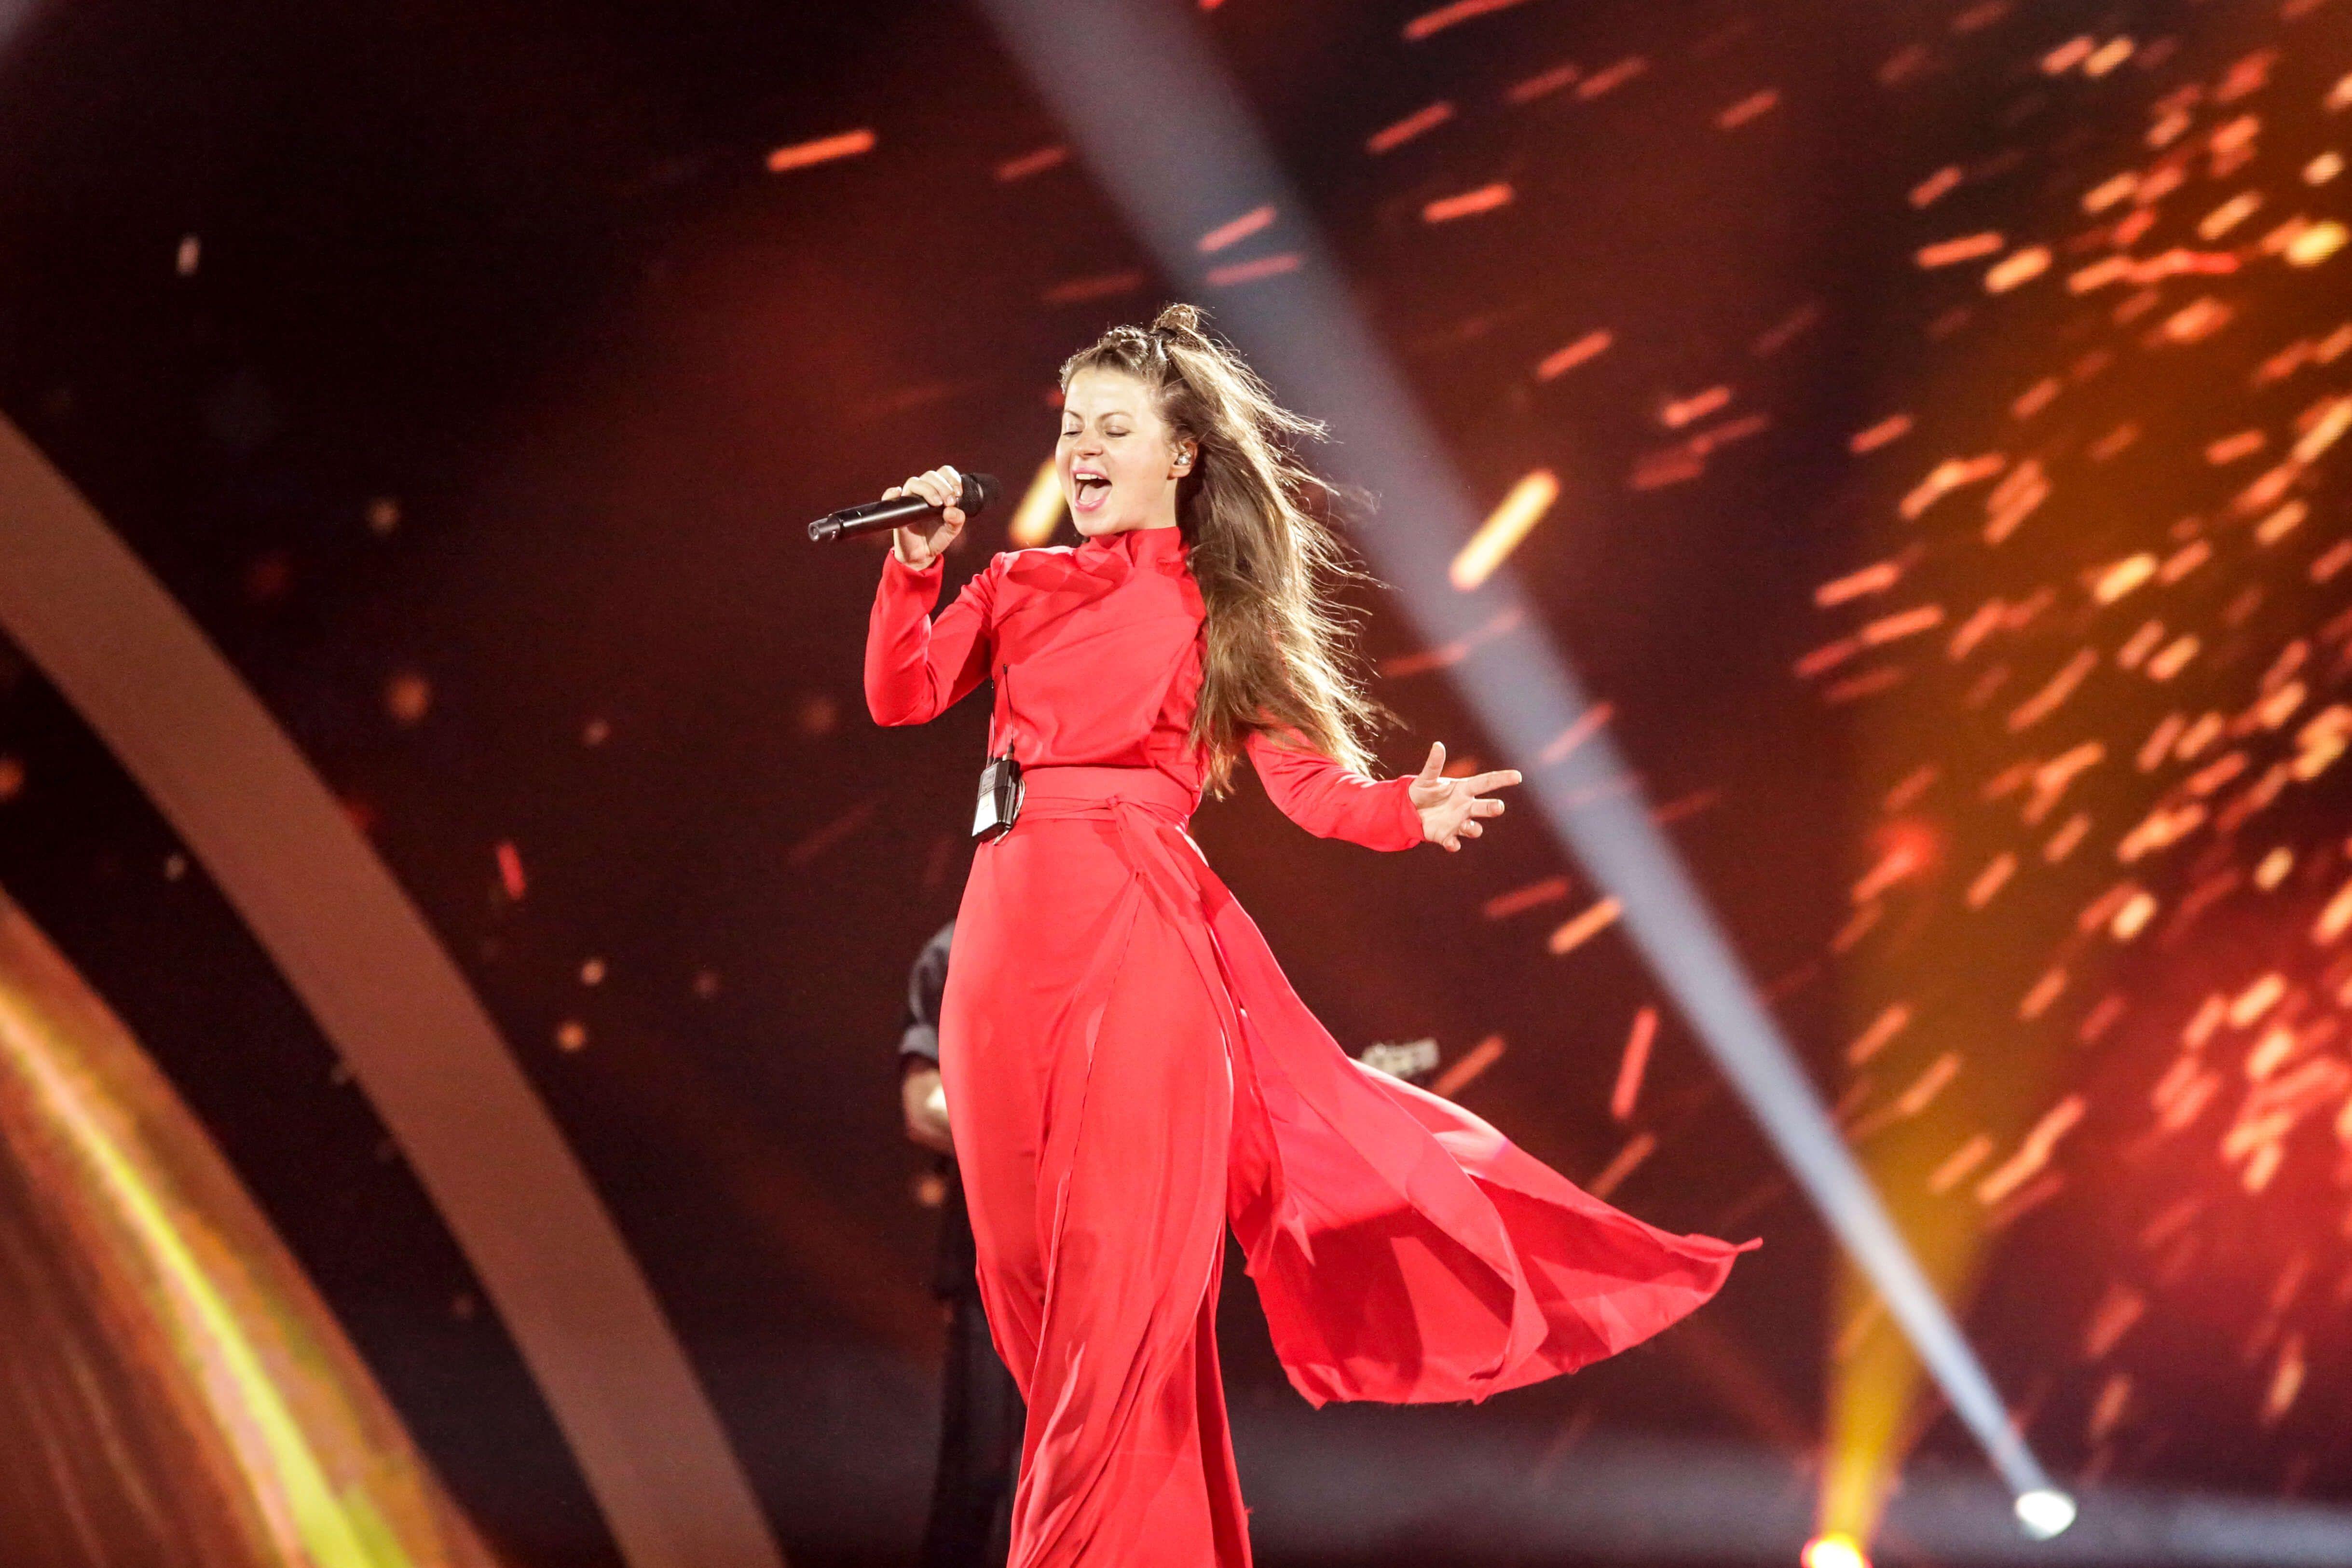 Lithuania: Eurovizijos 2018 Final Running Order Determined